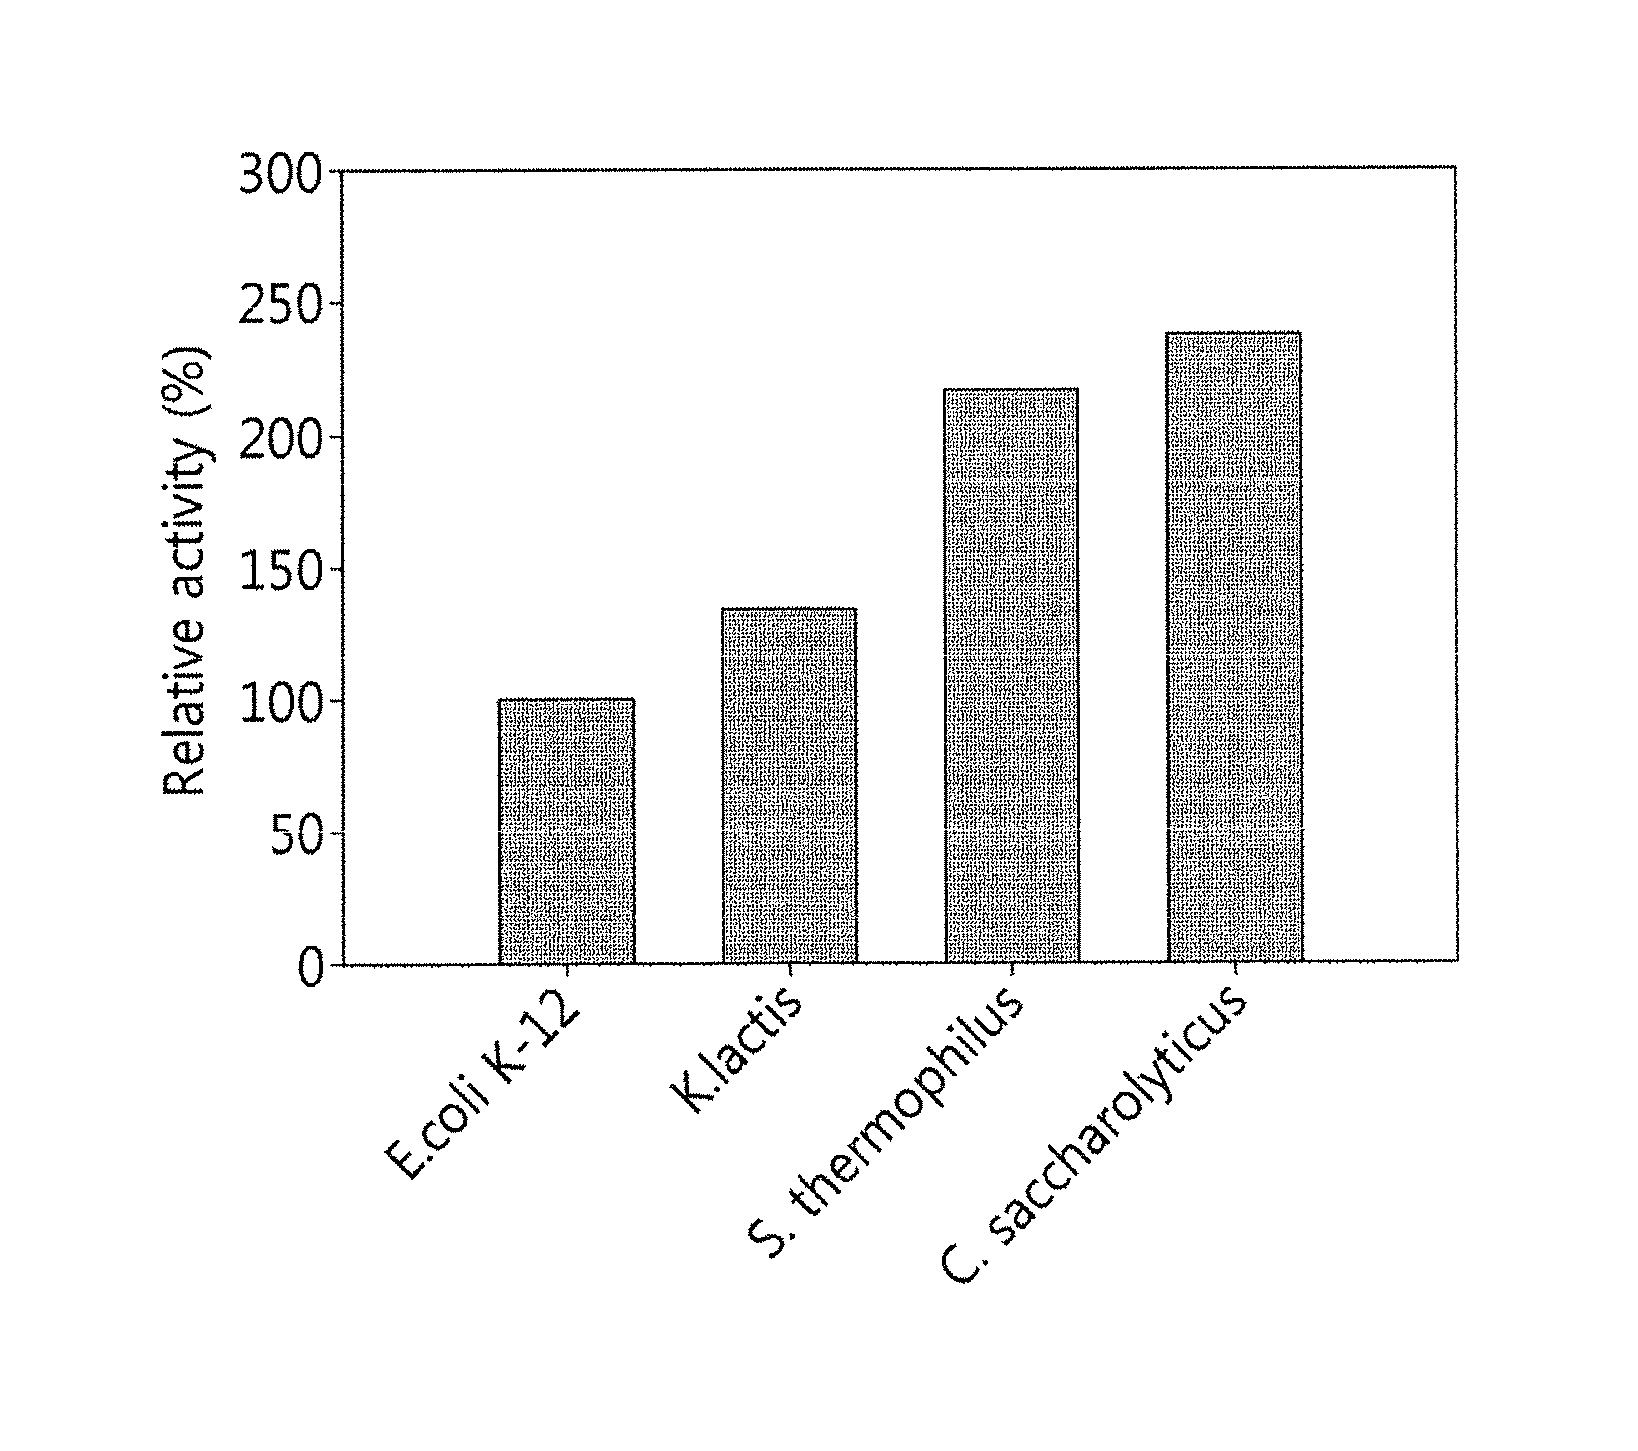 Aldolase, aldolase mutant, and method and composition for producing tagatose by using same